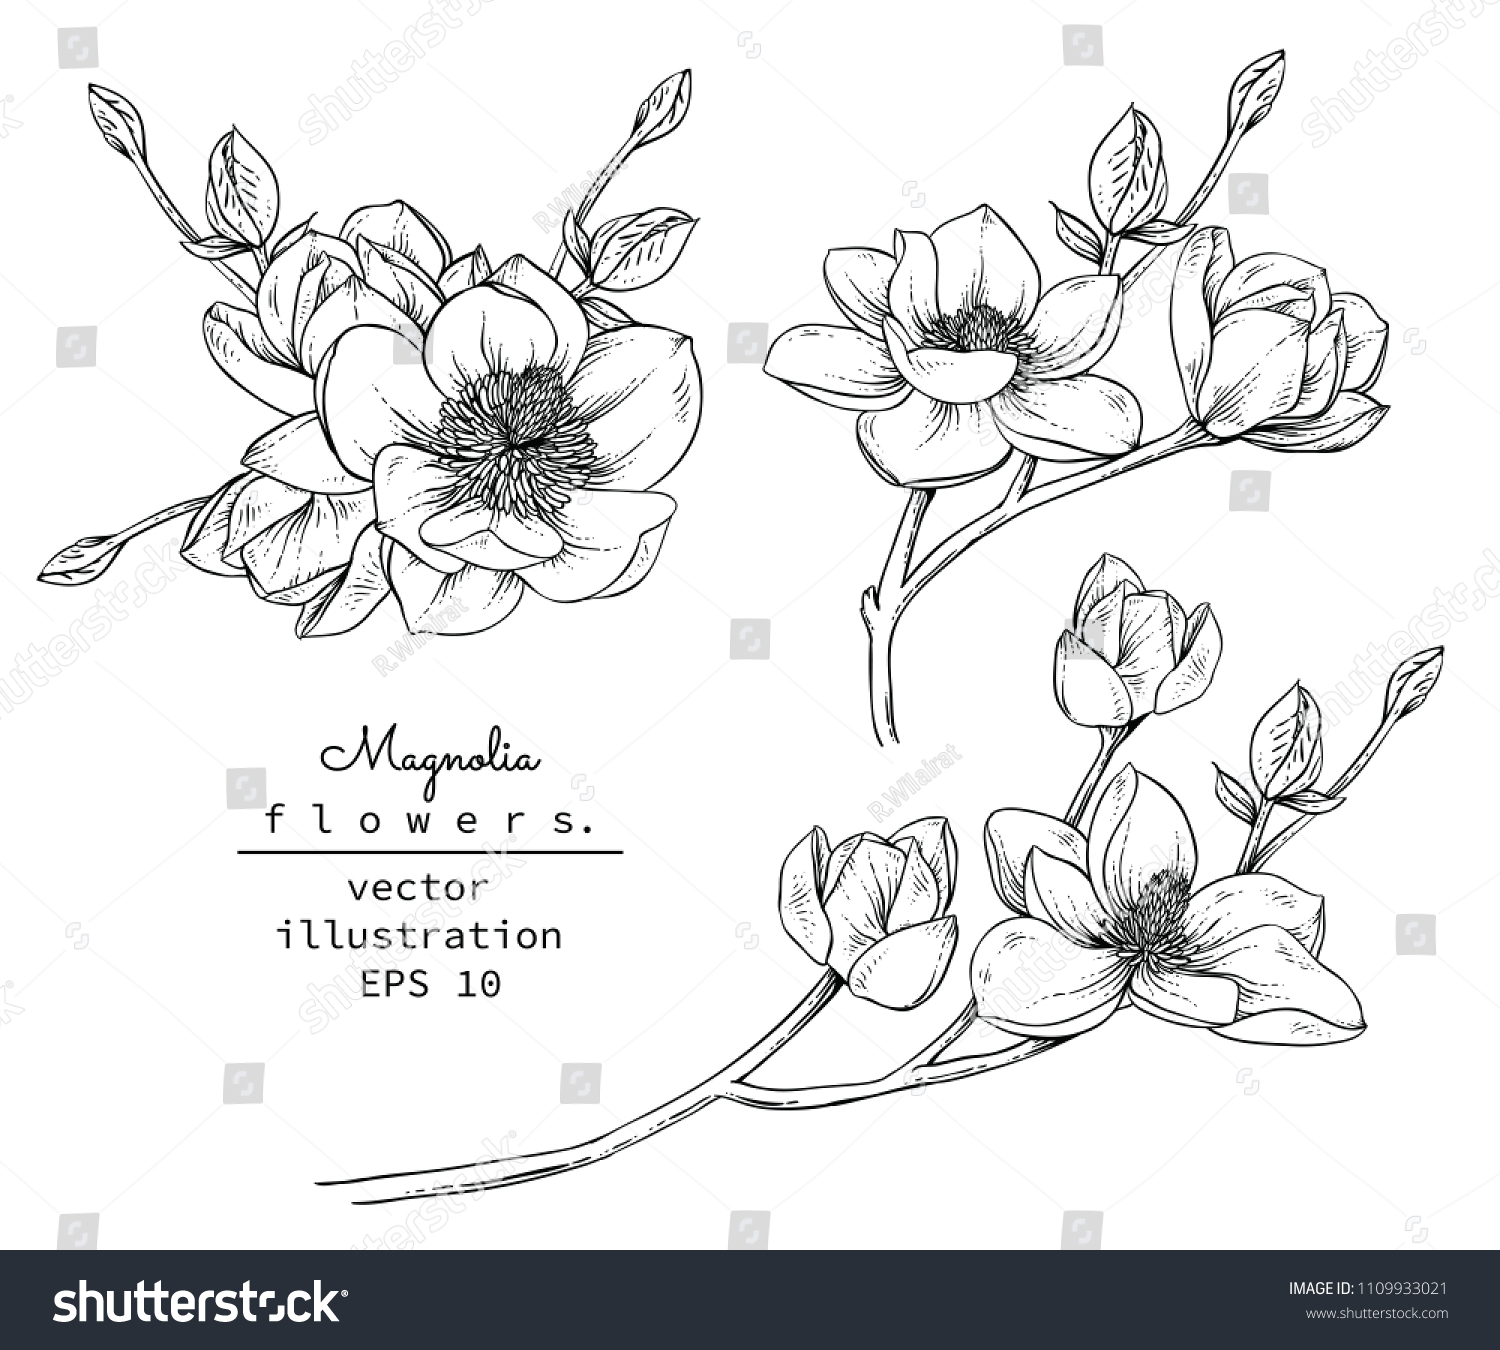 Sketch Floral Botany Collection. Magnolia flower drawings. Black and white with line art on white backgrounds. Hand Drawn Botanical Illustrations.Vector. #1109933021